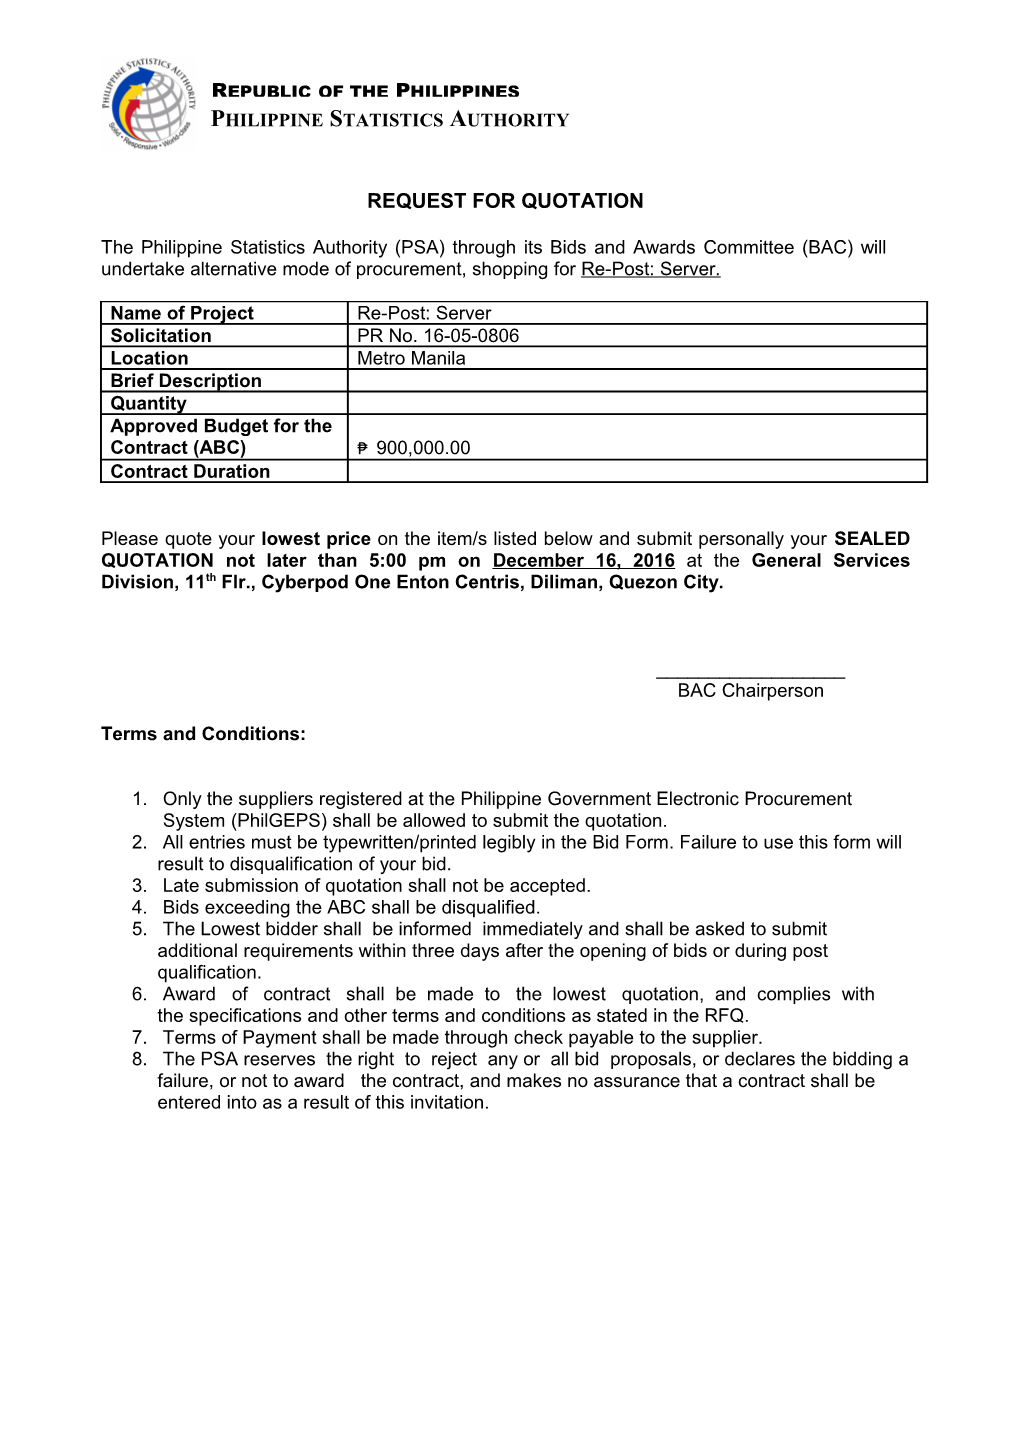 Request for Quotation s12